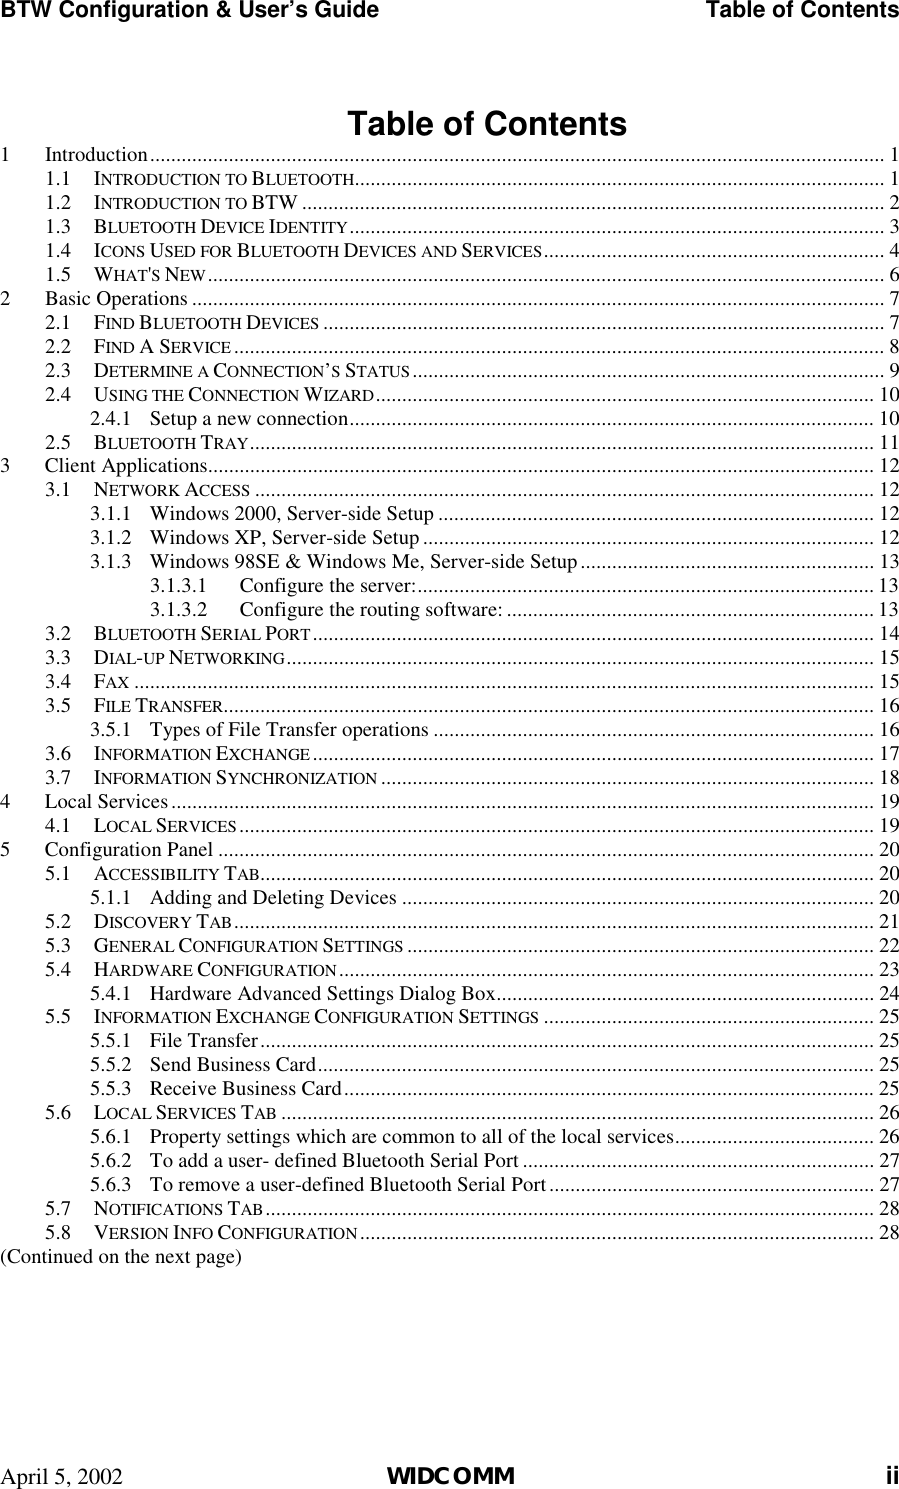 BTW Configuration &amp; User’s Guide    Table of Contents April 5, 2002  WIDCOMM ii  Table of Contents 1 Introduction............................................................................................................................................ 1 1.1 INTRODUCTION TO BLUETOOTH..................................................................................................... 1 1.2 INTRODUCTION TO BTW ............................................................................................................... 2 1.3 BLUETOOTH DEVICE IDENTITY...................................................................................................... 3 1.4 ICONS USED FOR BLUETOOTH DEVICES AND SERVICES................................................................. 4 1.5 WHAT&apos;S NEW................................................................................................................................. 6 2 Basic Operations .................................................................................................................................... 7 2.1 FIND BLUETOOTH DEVICES ........................................................................................................... 7 2.2 FIND A SERVICE ............................................................................................................................ 8 2.3 DETERMINE A CONNECTION’S STATUS.......................................................................................... 9 2.4 USING THE CONNECTION WIZARD............................................................................................... 10 2.4.1  Setup a new connection.................................................................................................... 10 2.5 BLUETOOTH TRAY....................................................................................................................... 11 3 Client Applications............................................................................................................................... 12 3.1 NETWORK ACCESS ...................................................................................................................... 12 3.1.1  Windows 2000, Server-side Setup ................................................................................... 12 3.1.2  Windows XP, Server-side Setup...................................................................................... 12 3.1.3  Windows 98SE &amp; Windows Me, Server-side Setup........................................................ 13 3.1.3.1  Configure the server:....................................................................................... 13 3.1.3.2  Configure the routing software: ...................................................................... 13 3.2 BLUETOOTH SERIAL PORT........................................................................................................... 14 3.3 DIAL-UP NETWORKING................................................................................................................ 15 3.4 FAX ............................................................................................................................................. 15 3.5 FILE TRANSFER............................................................................................................................ 16 3.5.1  Types of File Transfer operations .................................................................................... 16 3.6 INFORMATION EXCHANGE........................................................................................................... 17 3.7 INFORMATION SYNCHRONIZATION .............................................................................................. 18 4 Local Services...................................................................................................................................... 19 4.1 LOCAL SERVICES......................................................................................................................... 19 5 Configuration Panel ............................................................................................................................. 20 5.1 ACCESSIBILITY TAB..................................................................................................................... 20 5.1.1  Adding and Deleting Devices .......................................................................................... 20 5.2 DISCOVERY TAB.......................................................................................................................... 21 5.3 GENERAL CONFIGURATION SETTINGS ......................................................................................... 22 5.4 HARDWARE CONFIGURATION...................................................................................................... 23 5.4.1  Hardware Advanced Settings Dialog Box........................................................................ 24 5.5 INFORMATION EXCHANGE CONFIGURATION SETTINGS ............................................................... 25 5.5.1 File Transfer..................................................................................................................... 25 5.5.2  Send Business Card.......................................................................................................... 25 5.5.3  Receive Business Card..................................................................................................... 25 5.6 LOCAL SERVICES TAB ................................................................................................................. 26 5.6.1  Property settings which are common to all of the local services...................................... 26 5.6.2  To add a user- defined Bluetooth Serial Port ................................................................... 27 5.6.3  To remove a user-defined Bluetooth Serial Port.............................................................. 27 5.7 NOTIFICATIONS TAB.................................................................................................................... 28 5.8 VERSION INFO CONFIGURATION.................................................................................................. 28 (Continued on the next page)